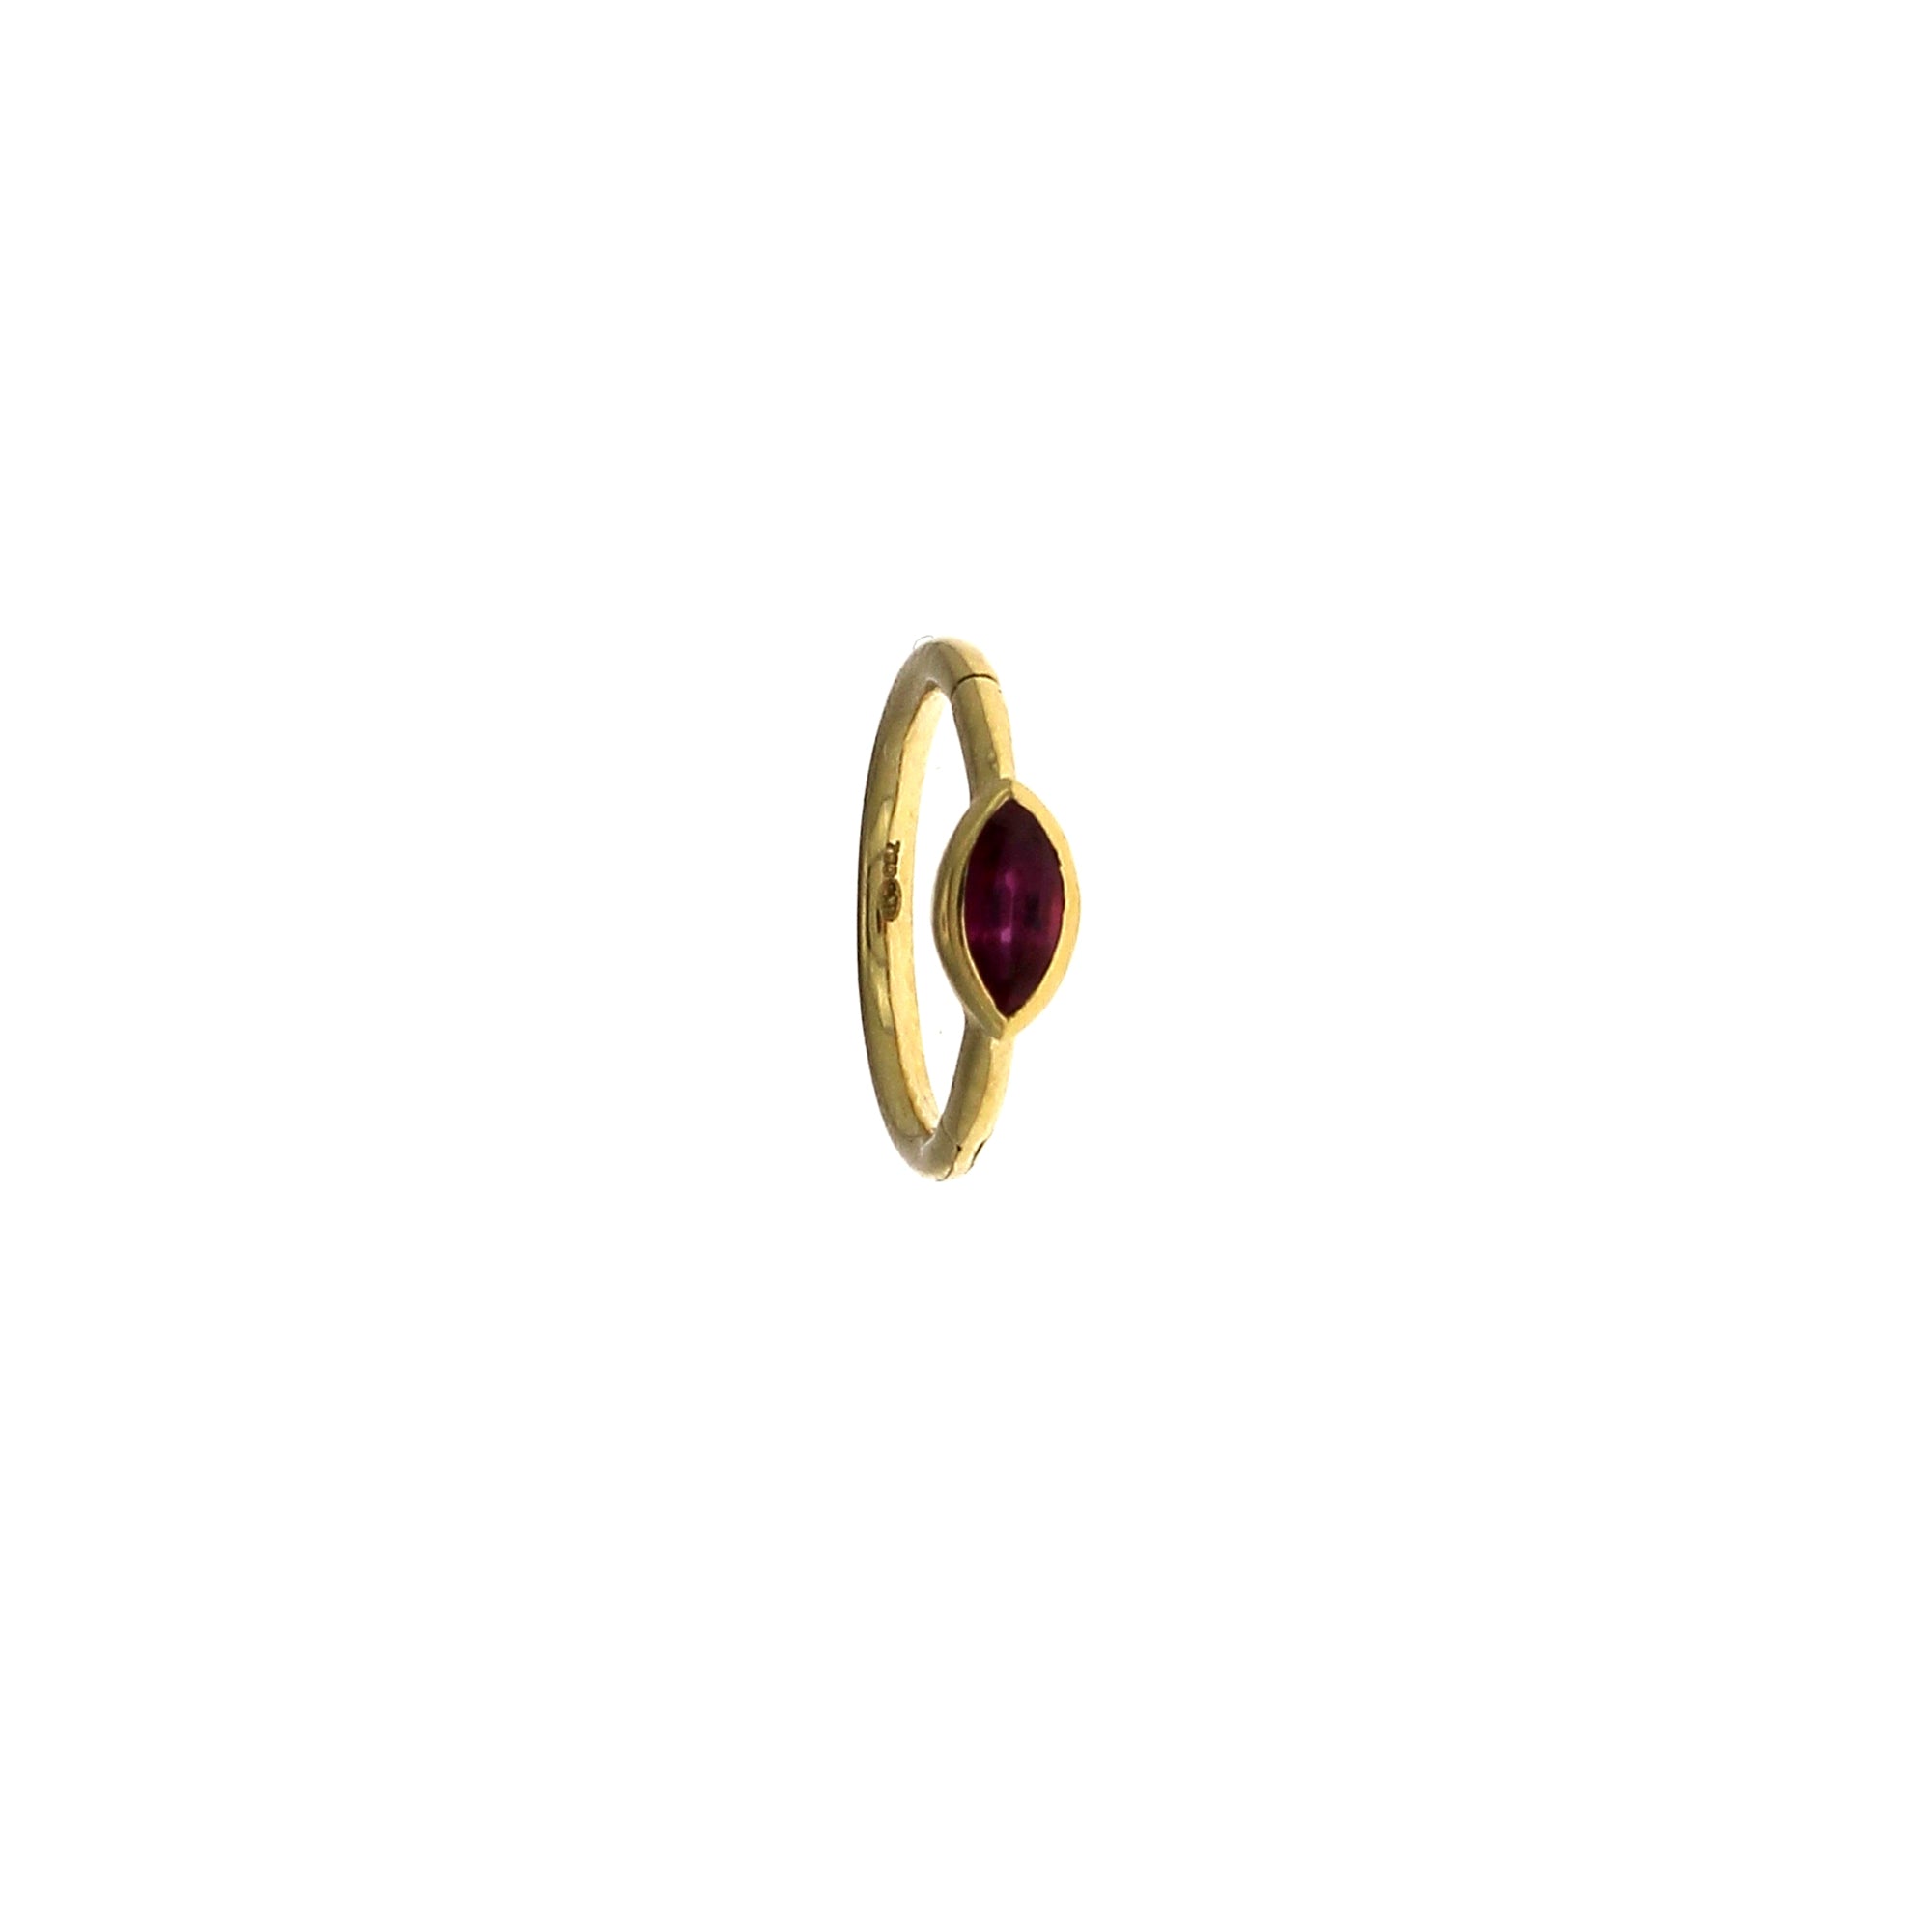 8mm Marquise Ruby 3x2mm Yellow Gold Hoop